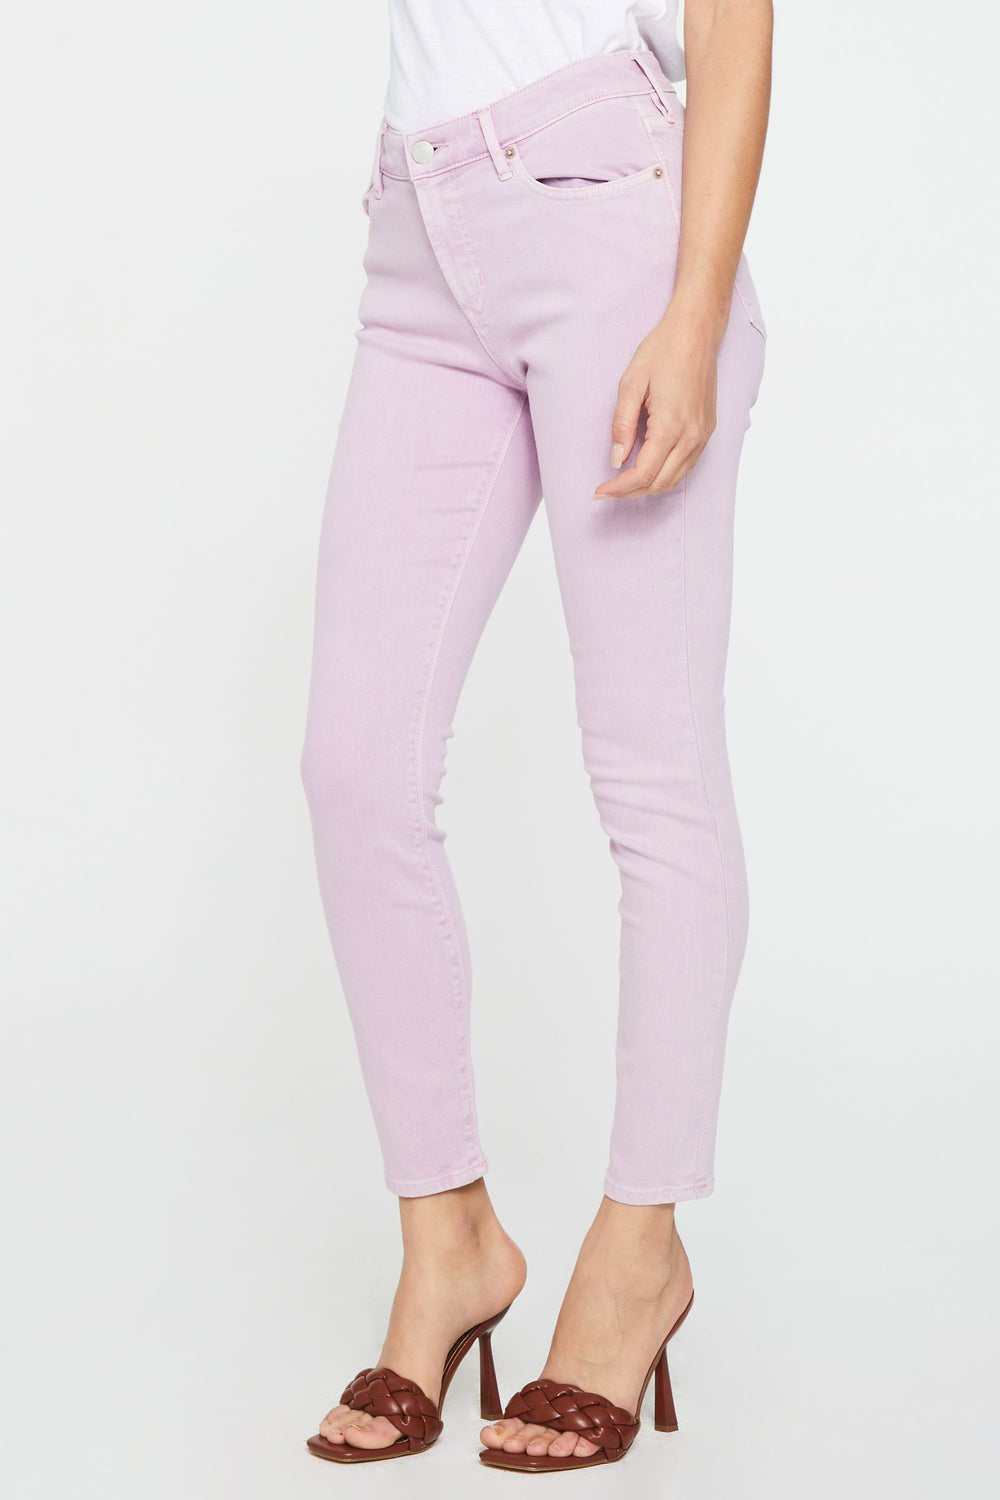 image of a female model wearing a GISELE HIGH RISE ANKLE SKINNY JEANS LAVENDER PINK JEANS